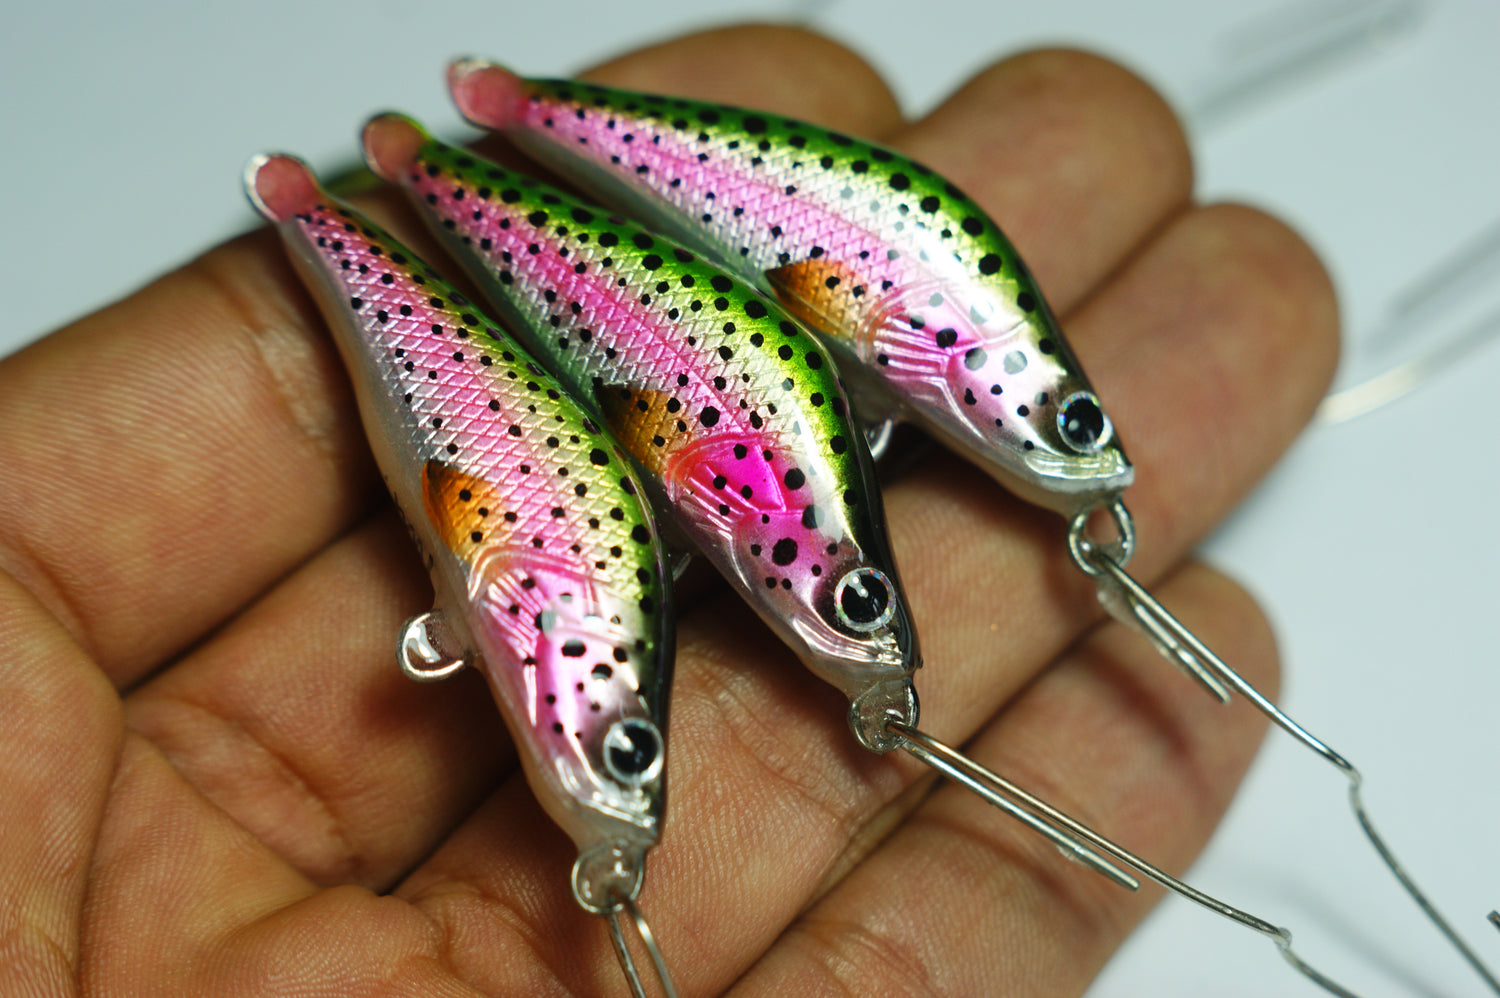 Field Study - Lures and Baits for Stocked Rainbow Trout - HubPages